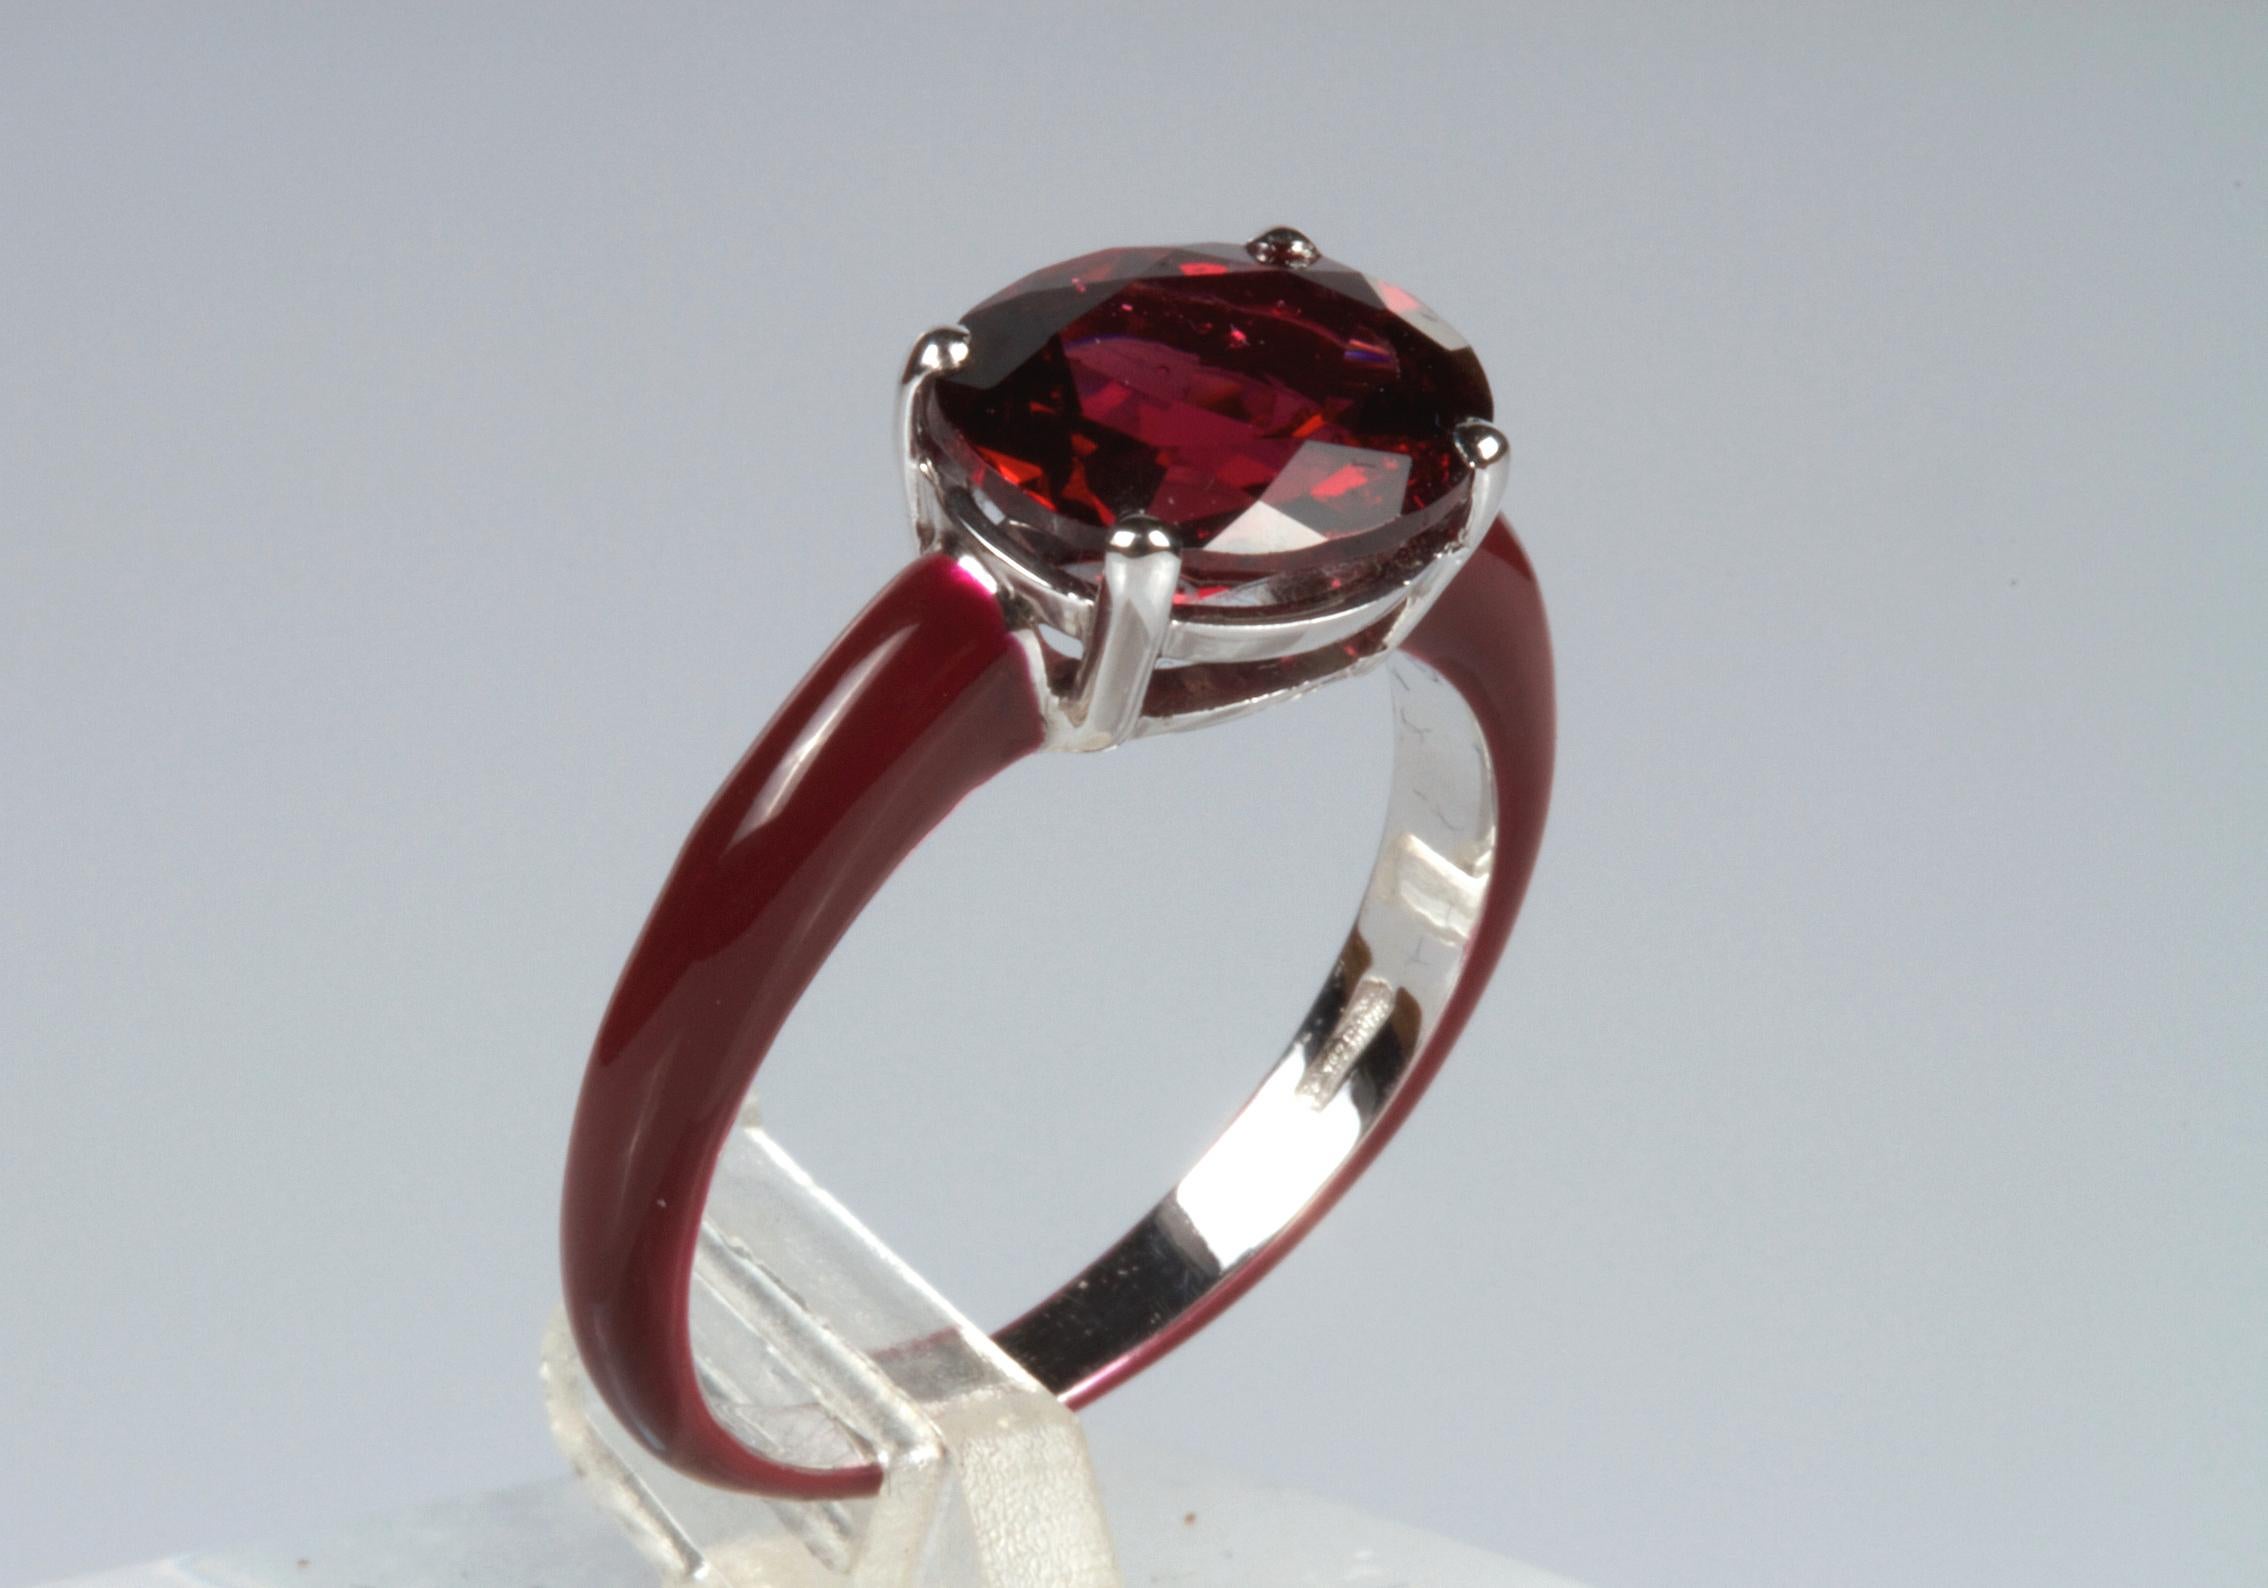 Elegant 18 karat white gold ring covered with red enamel and a beautiful oval garnet set in the center.
The ring is handmade by an Italian craftsman.
Garnet carat: 3.03
total weight: 3 grams
Size: 12 mm (inner diameter of the ring)
free size